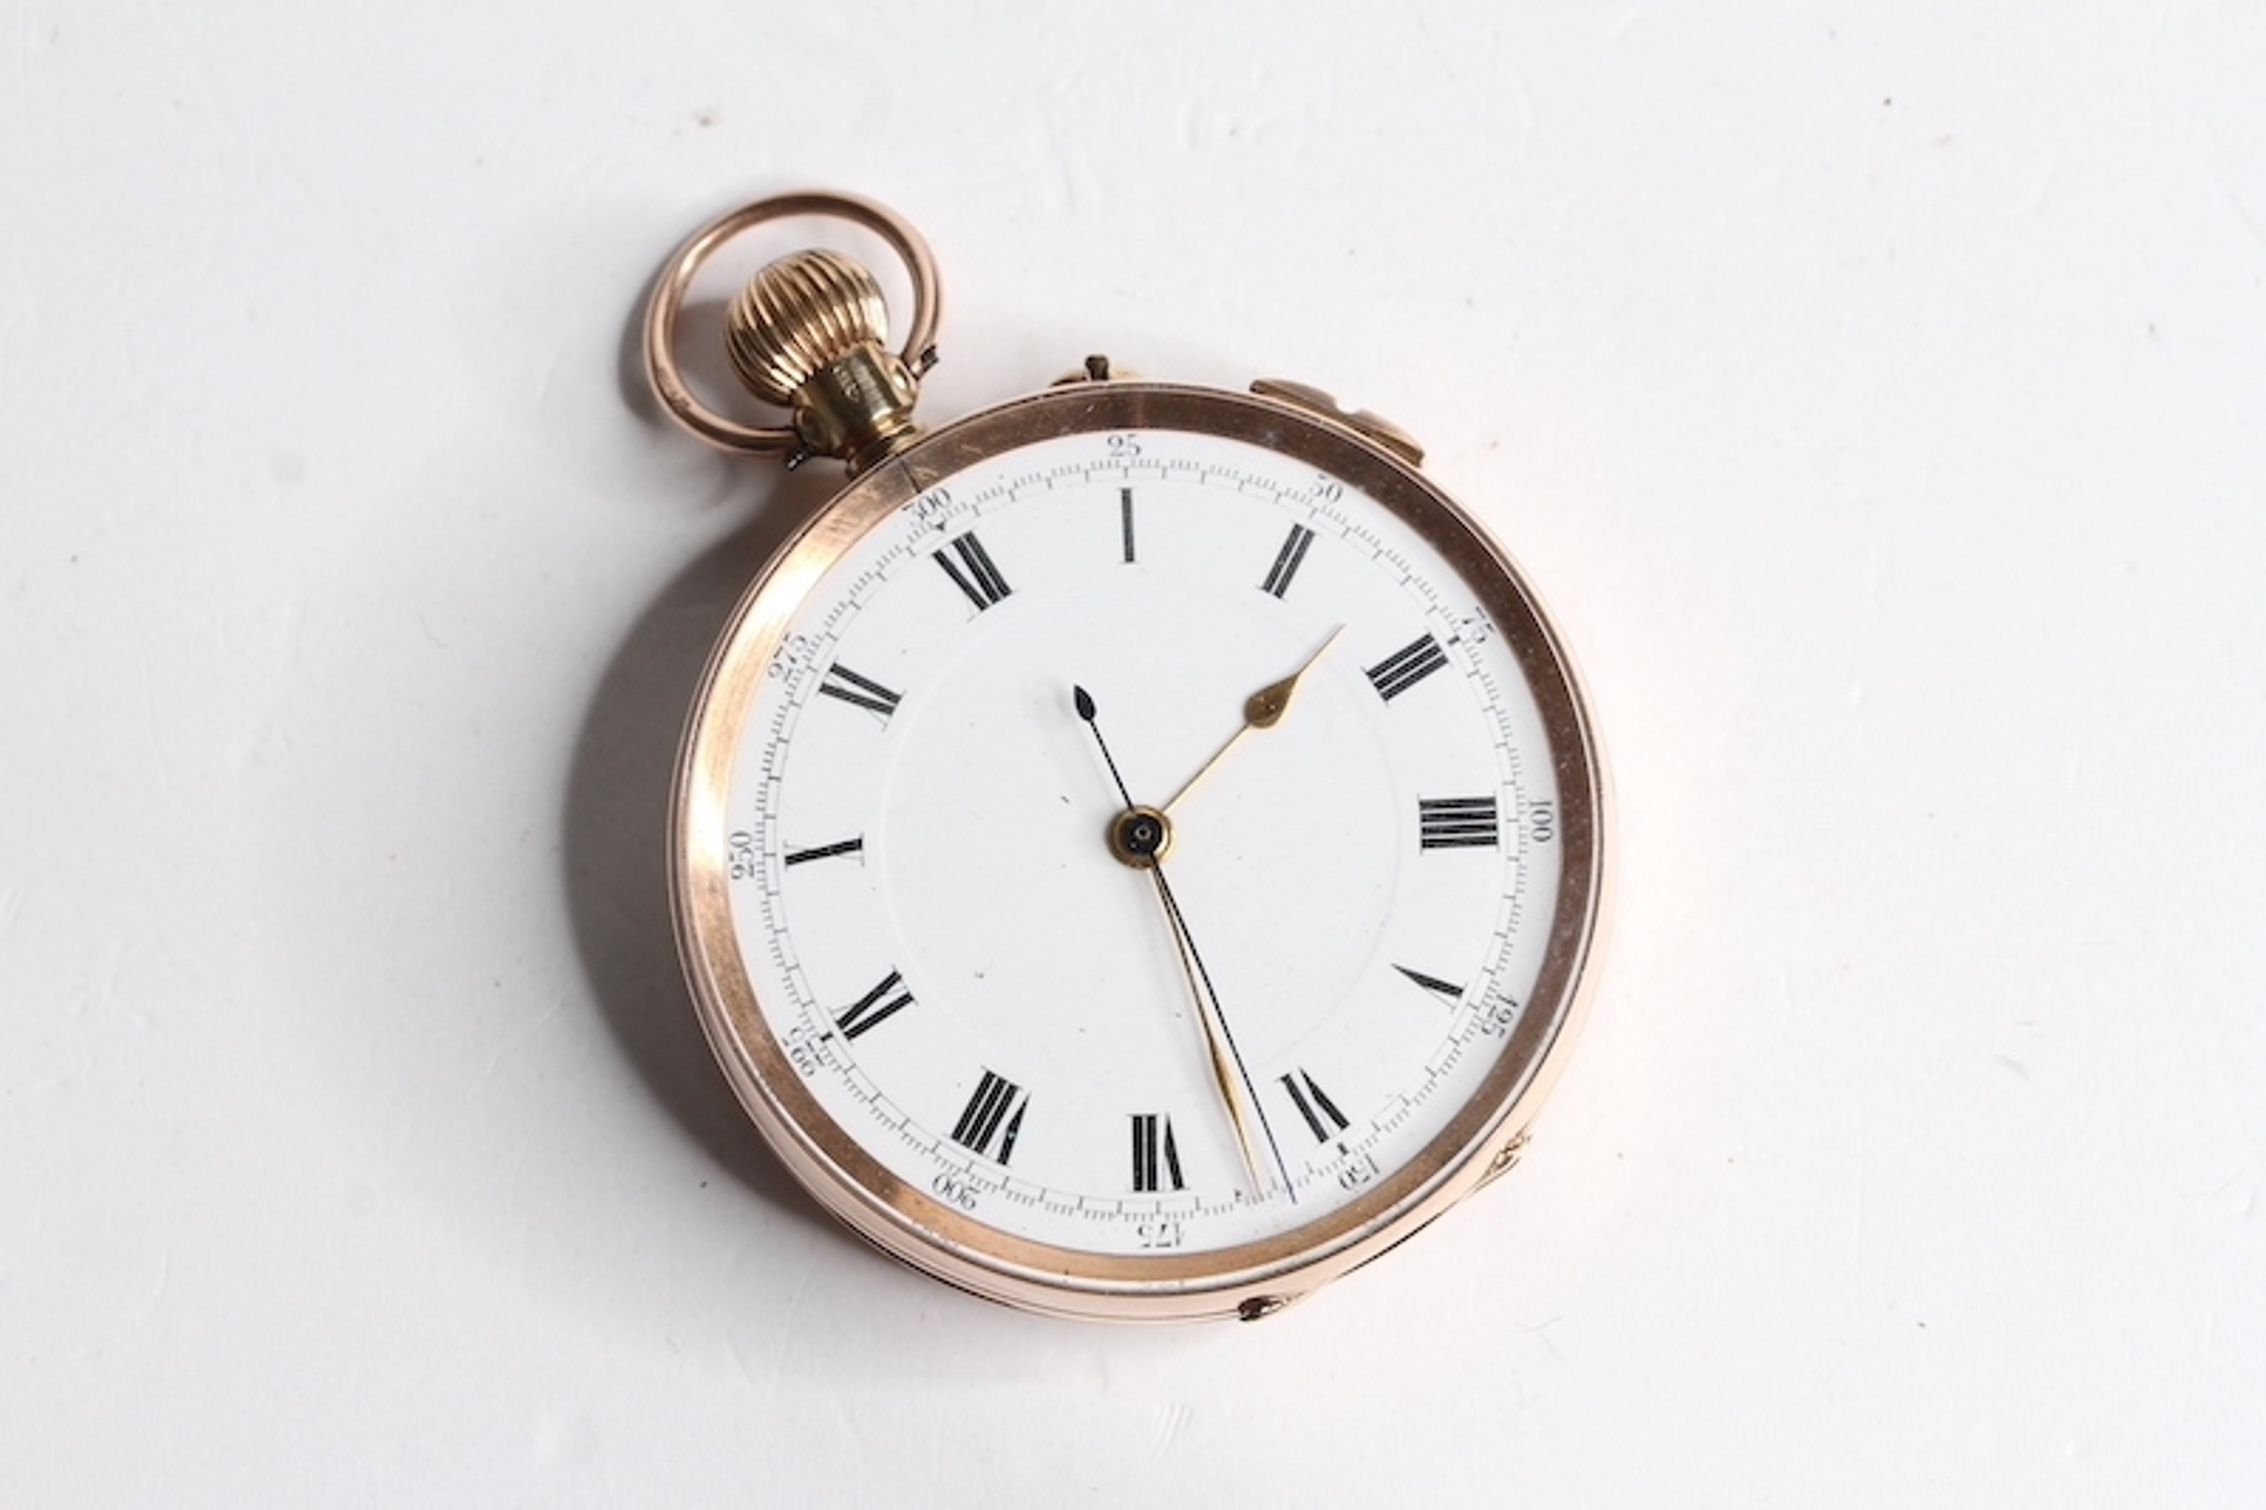 9CT CHRONOGRAPH POCKET WATCH, white dial with roman numerals hour markers, arabic numerals outer